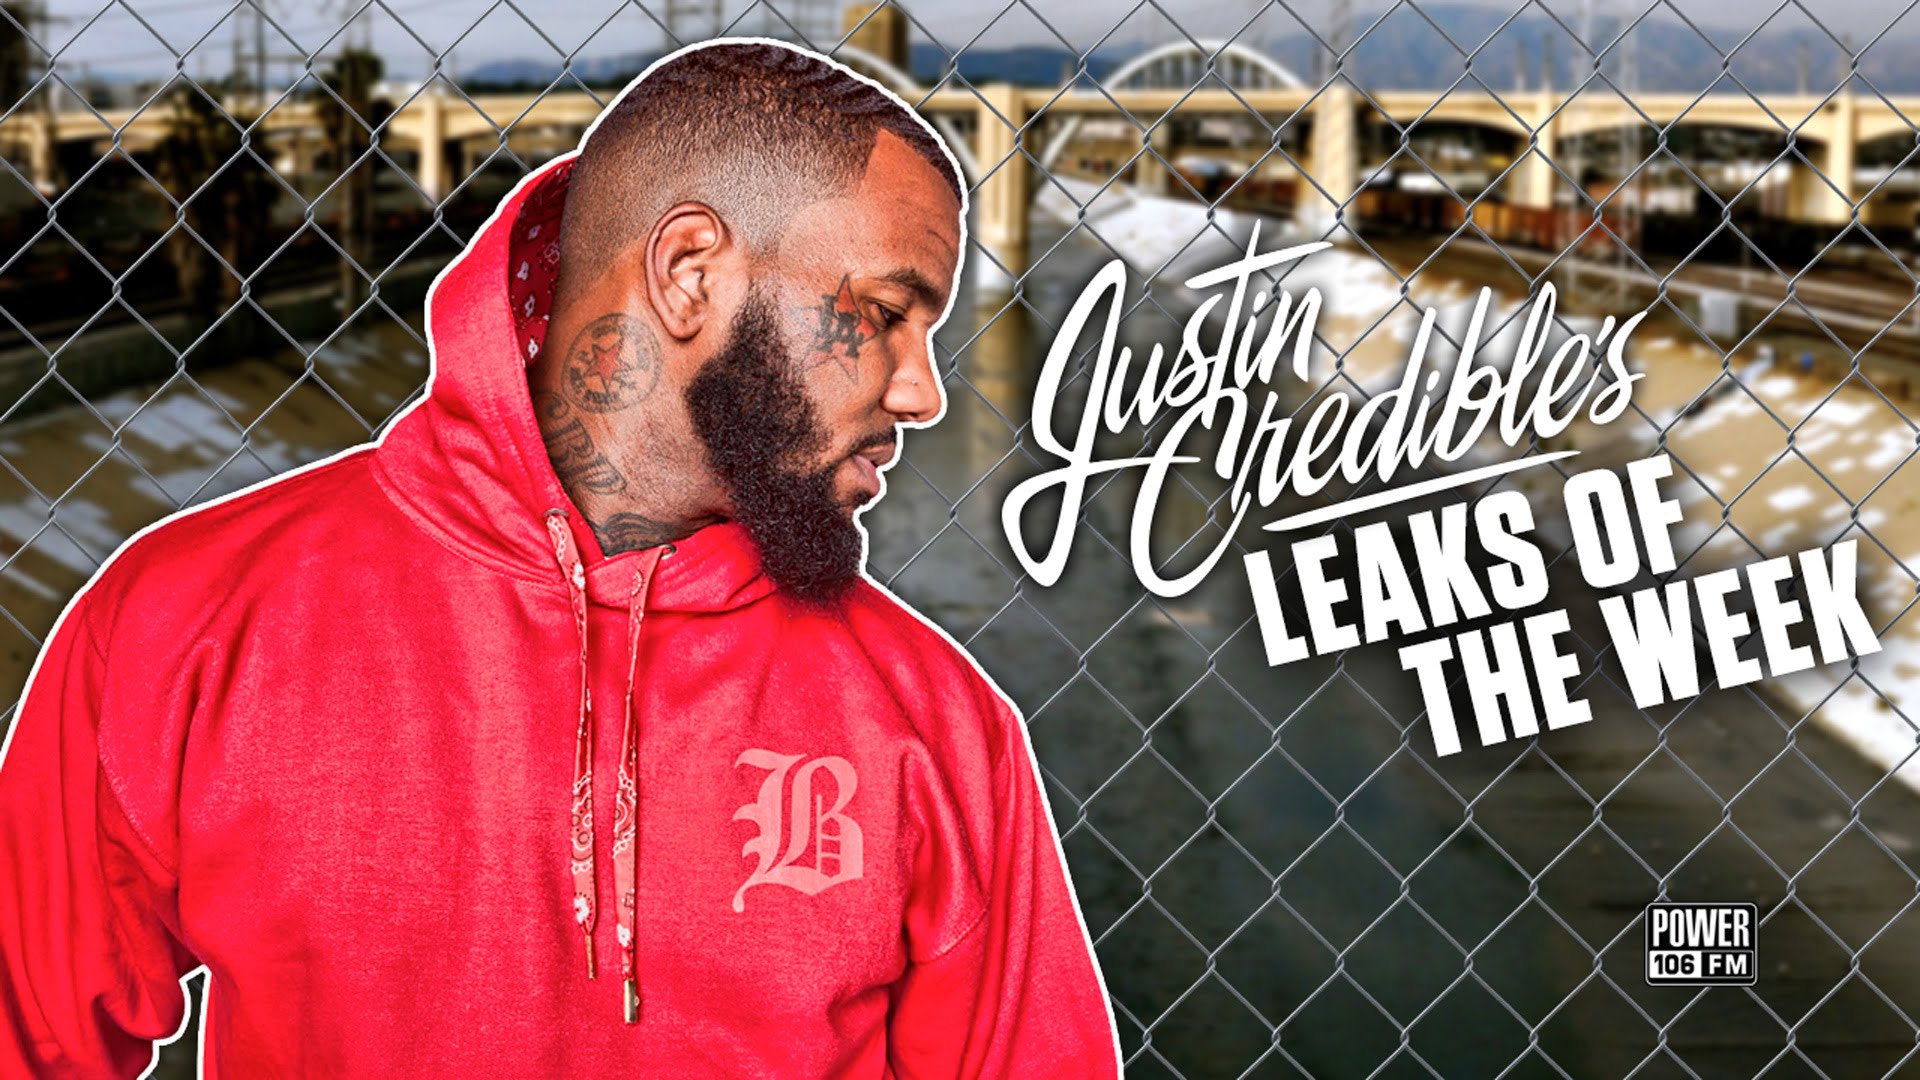 Justin Credible’s #LeaksOfTheLeak w/ Rick Ross, The Game, Tinashe, Mac Miller (Video)